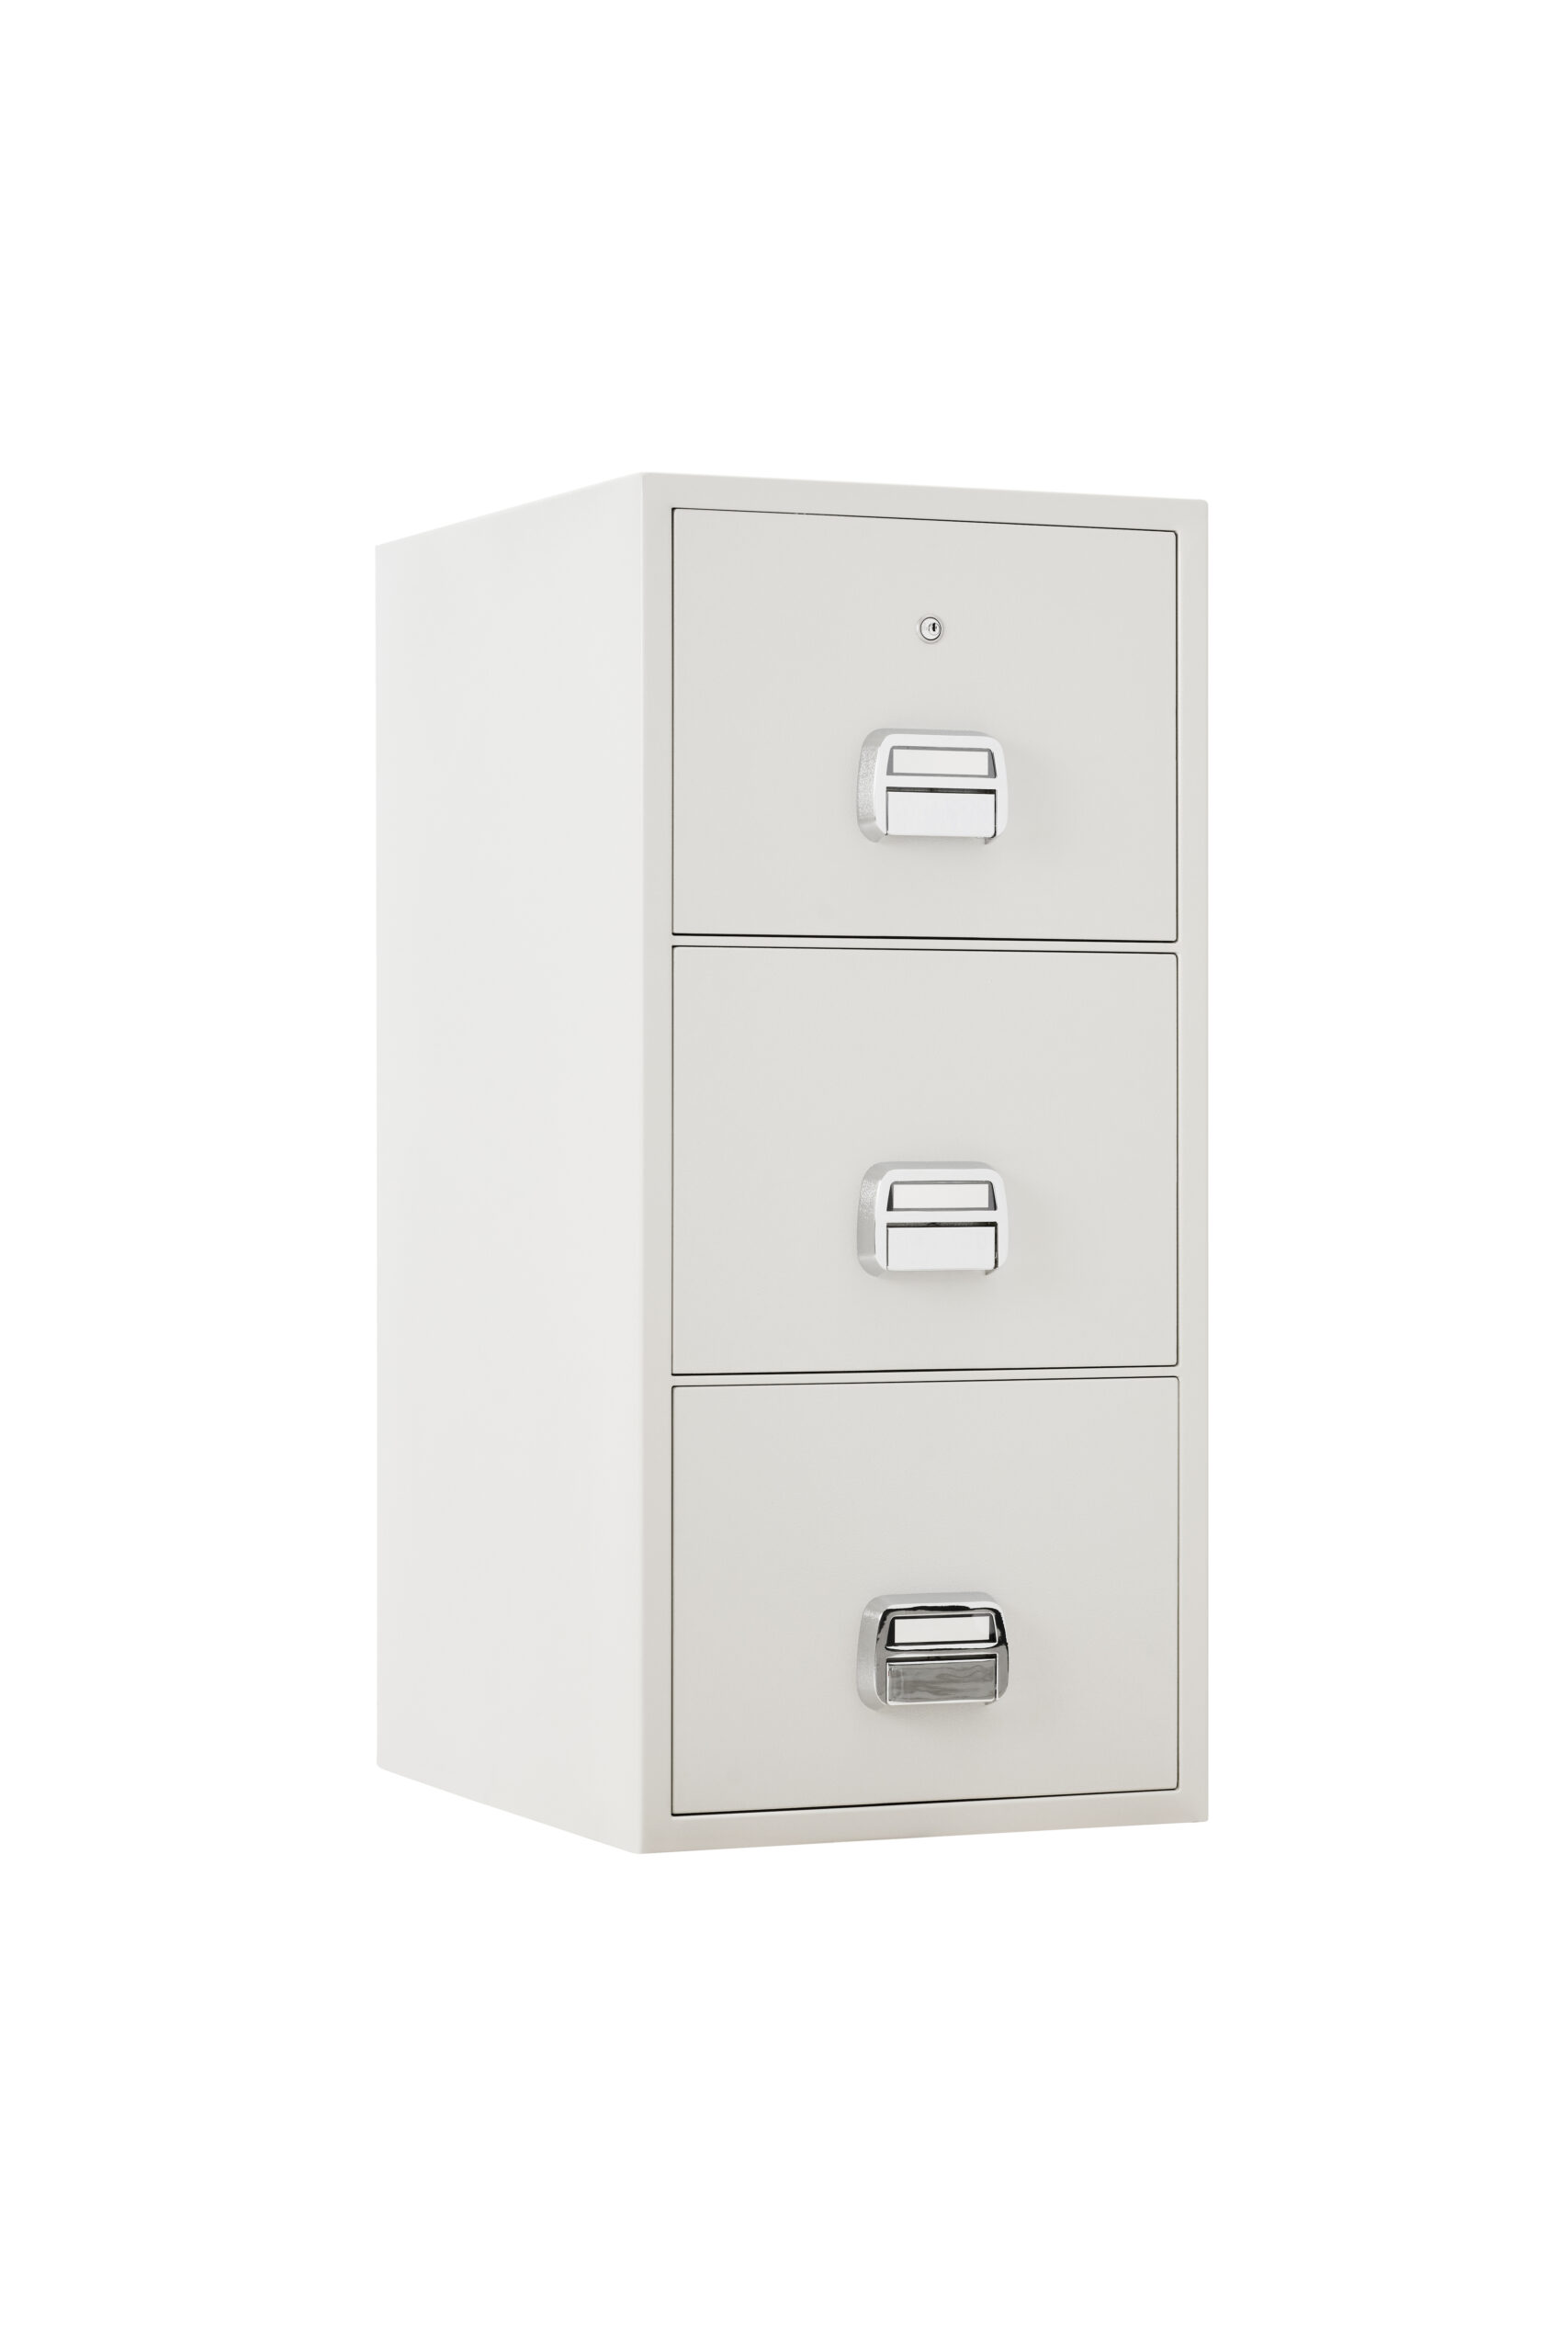 The De Raat Protector SF0680-3DK is a 3 drawer fire resistant filing cabinet. It is a good fire filer with a 90 minute protection for paper records. This comes with a good quality key lock with 2 keys.